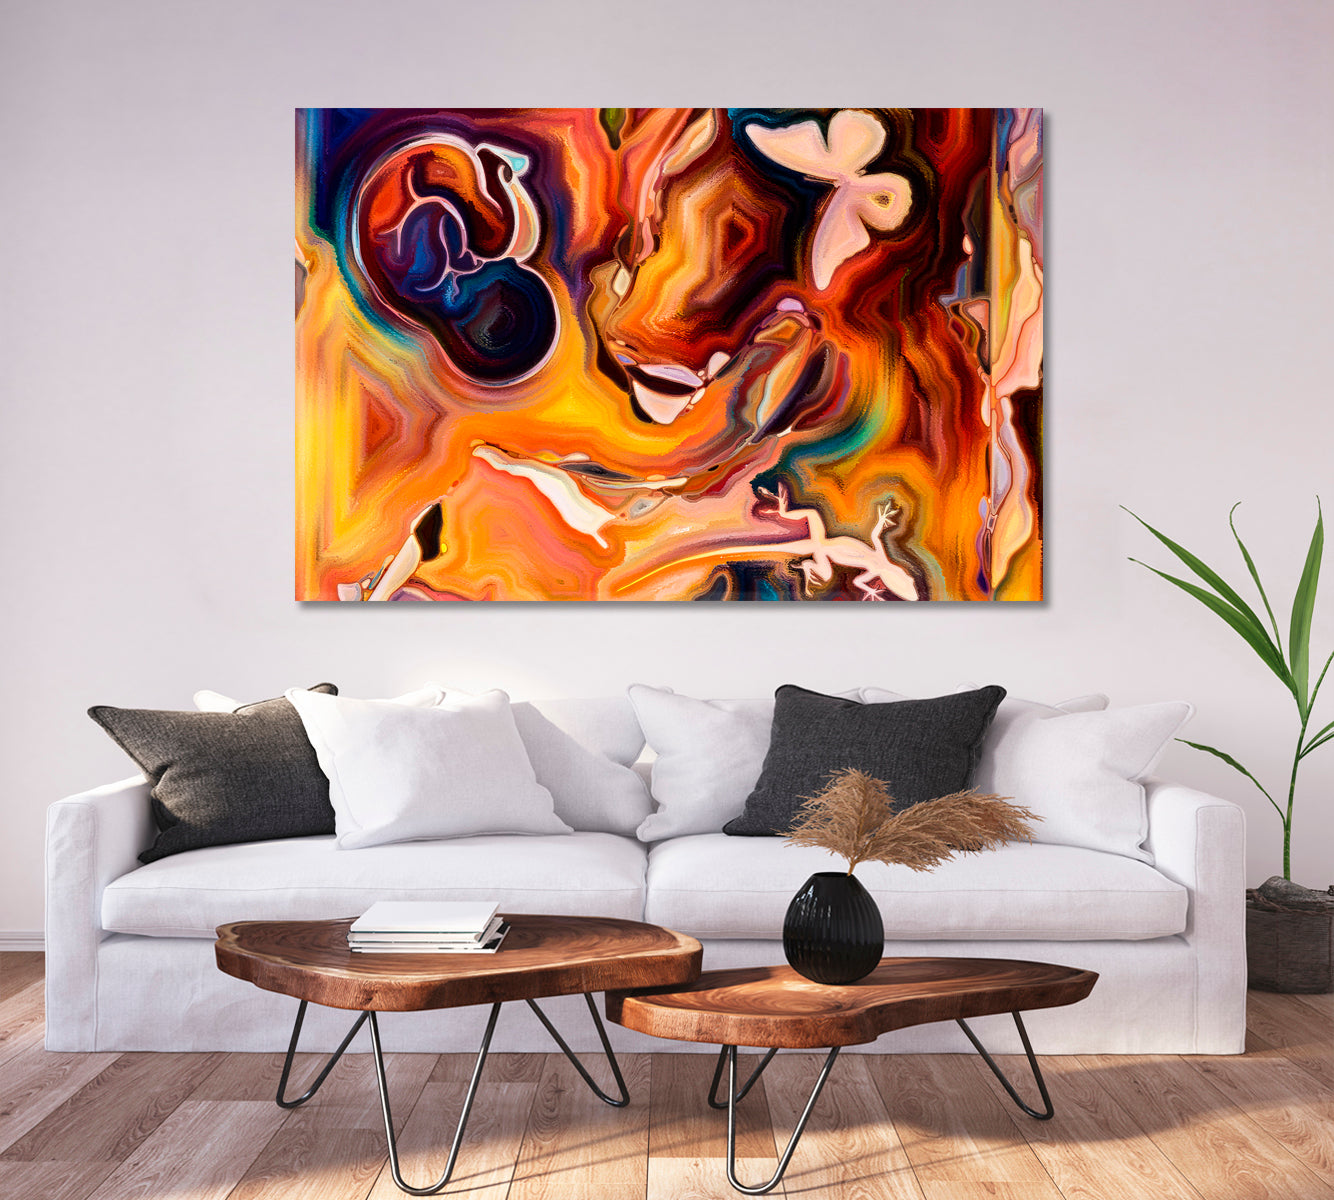 LIVES AND LIFE INSIDE A PAINTING Abstract Art Print Artesty 1 panel 24" x 16" 